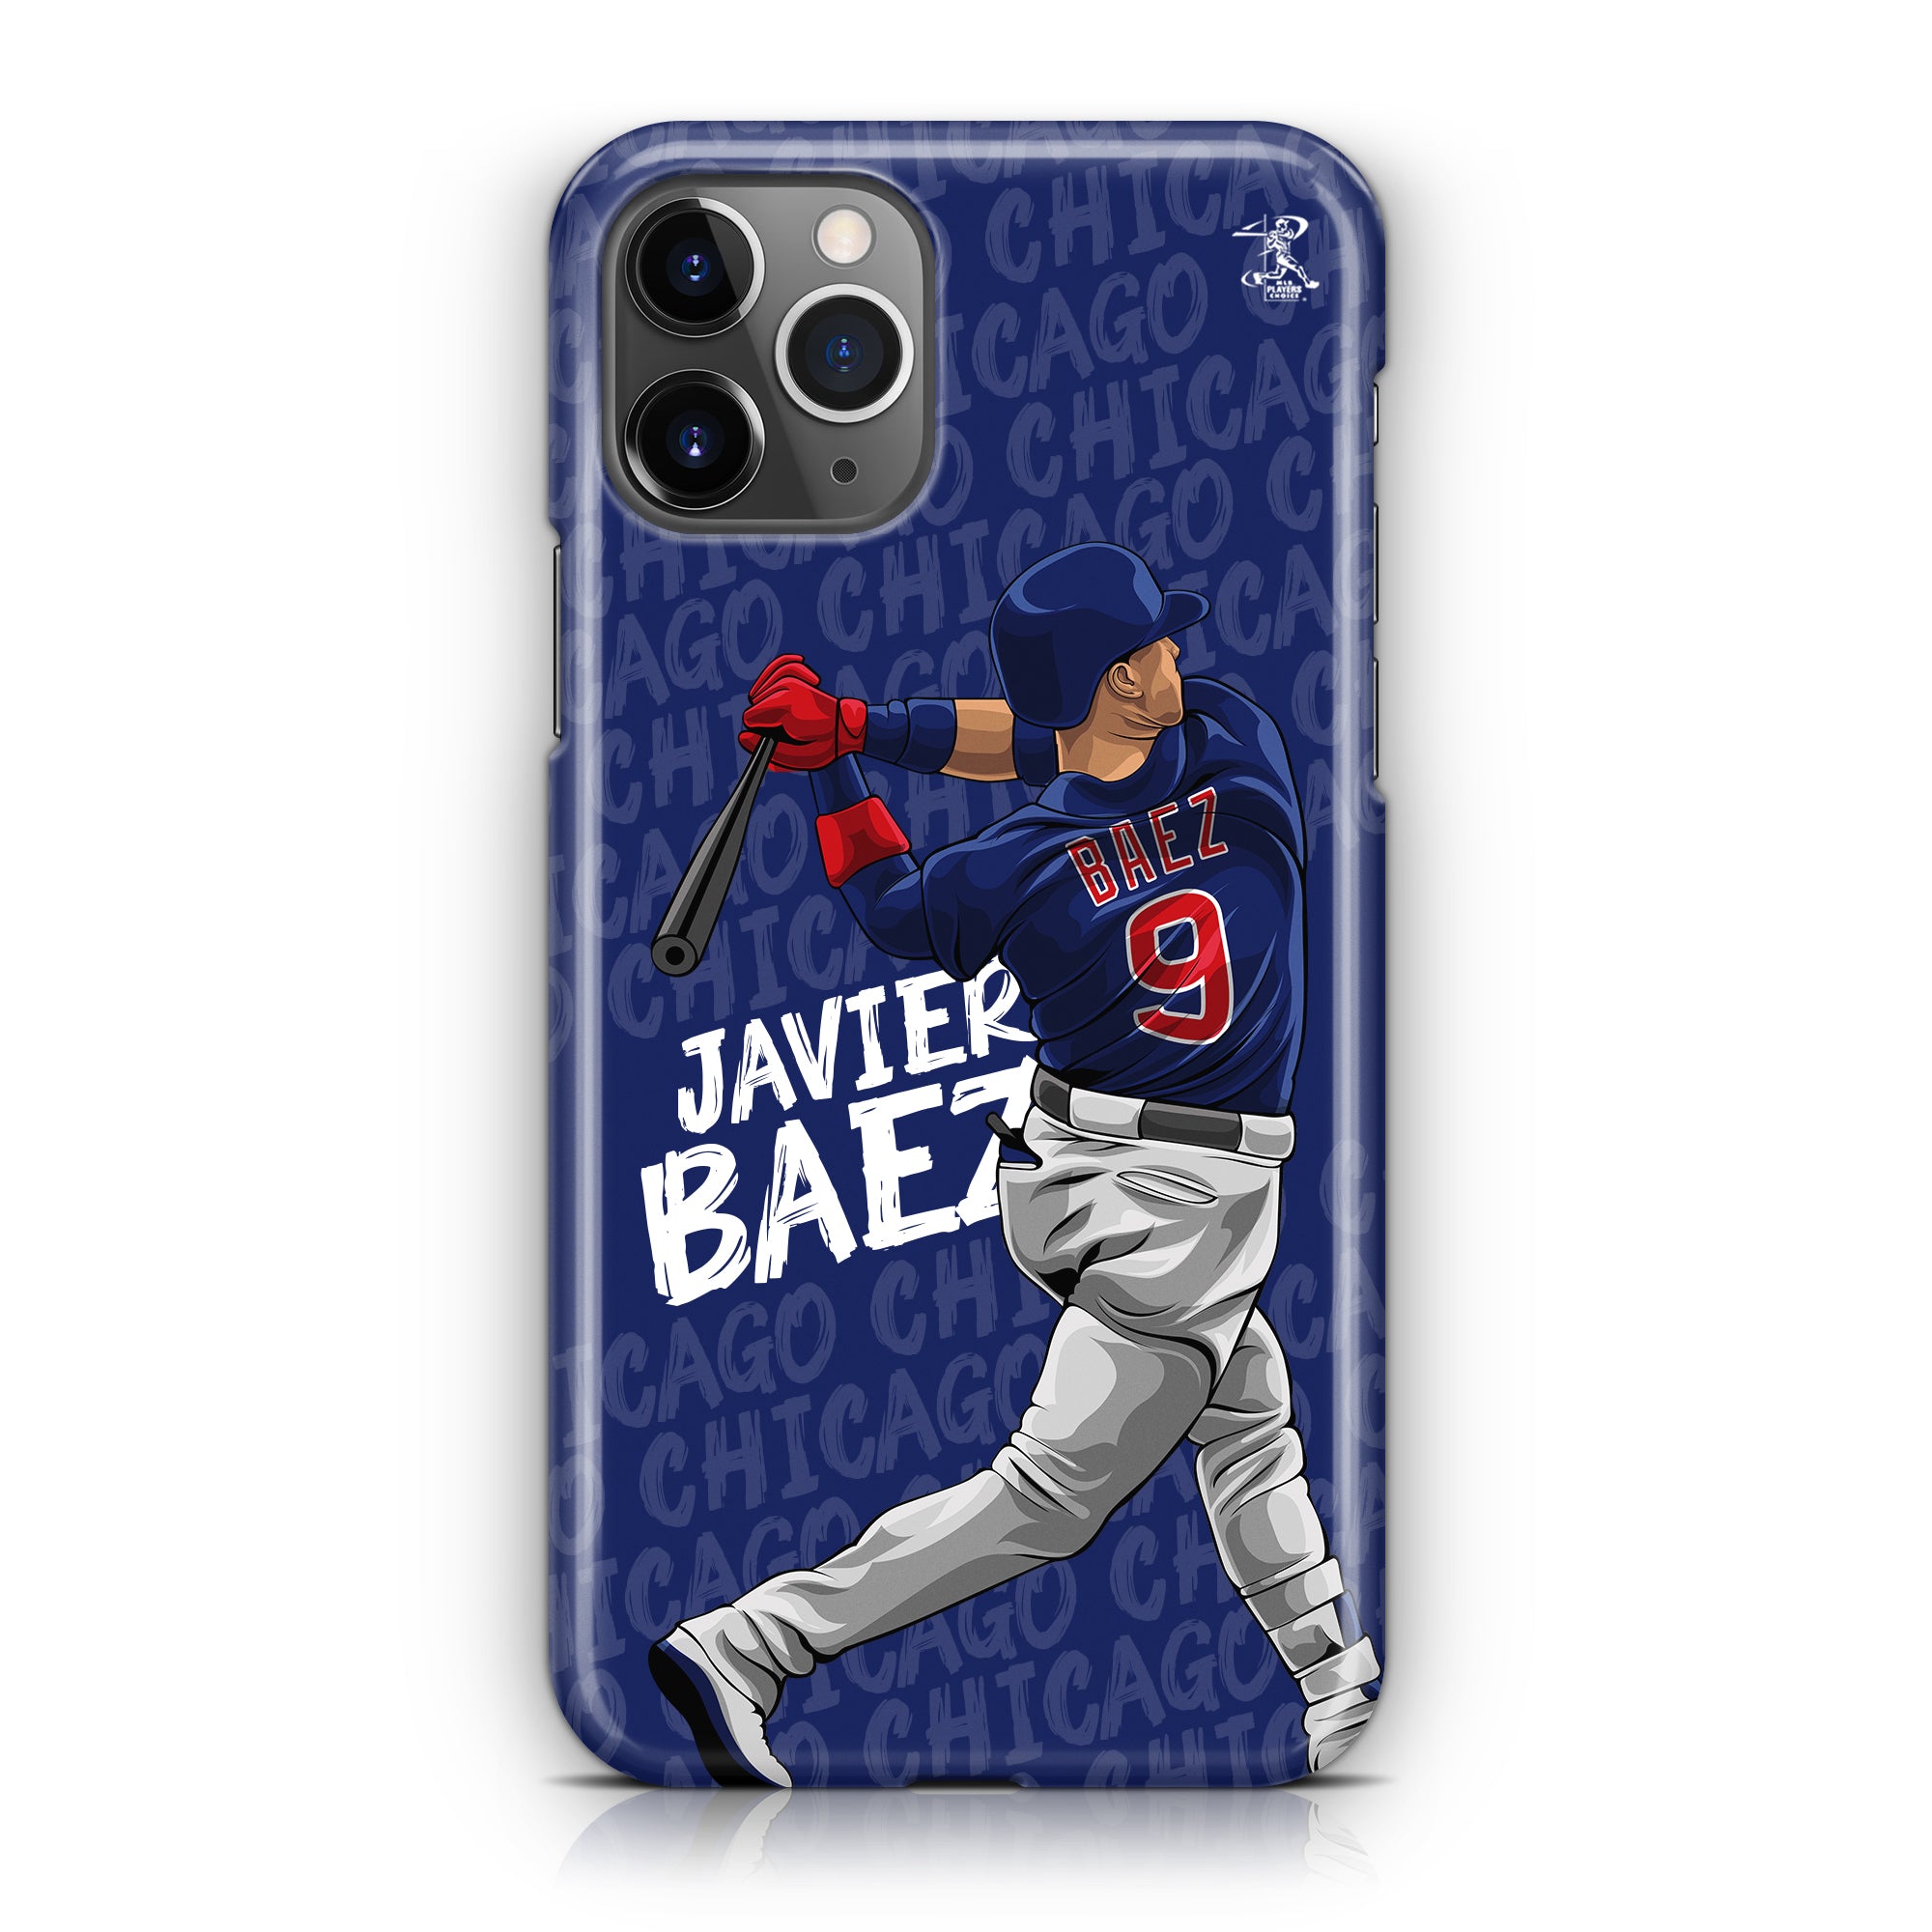 JAVIER BAEZ CHICAGO CUBS BASEBALL iPhone 12 Case Cover